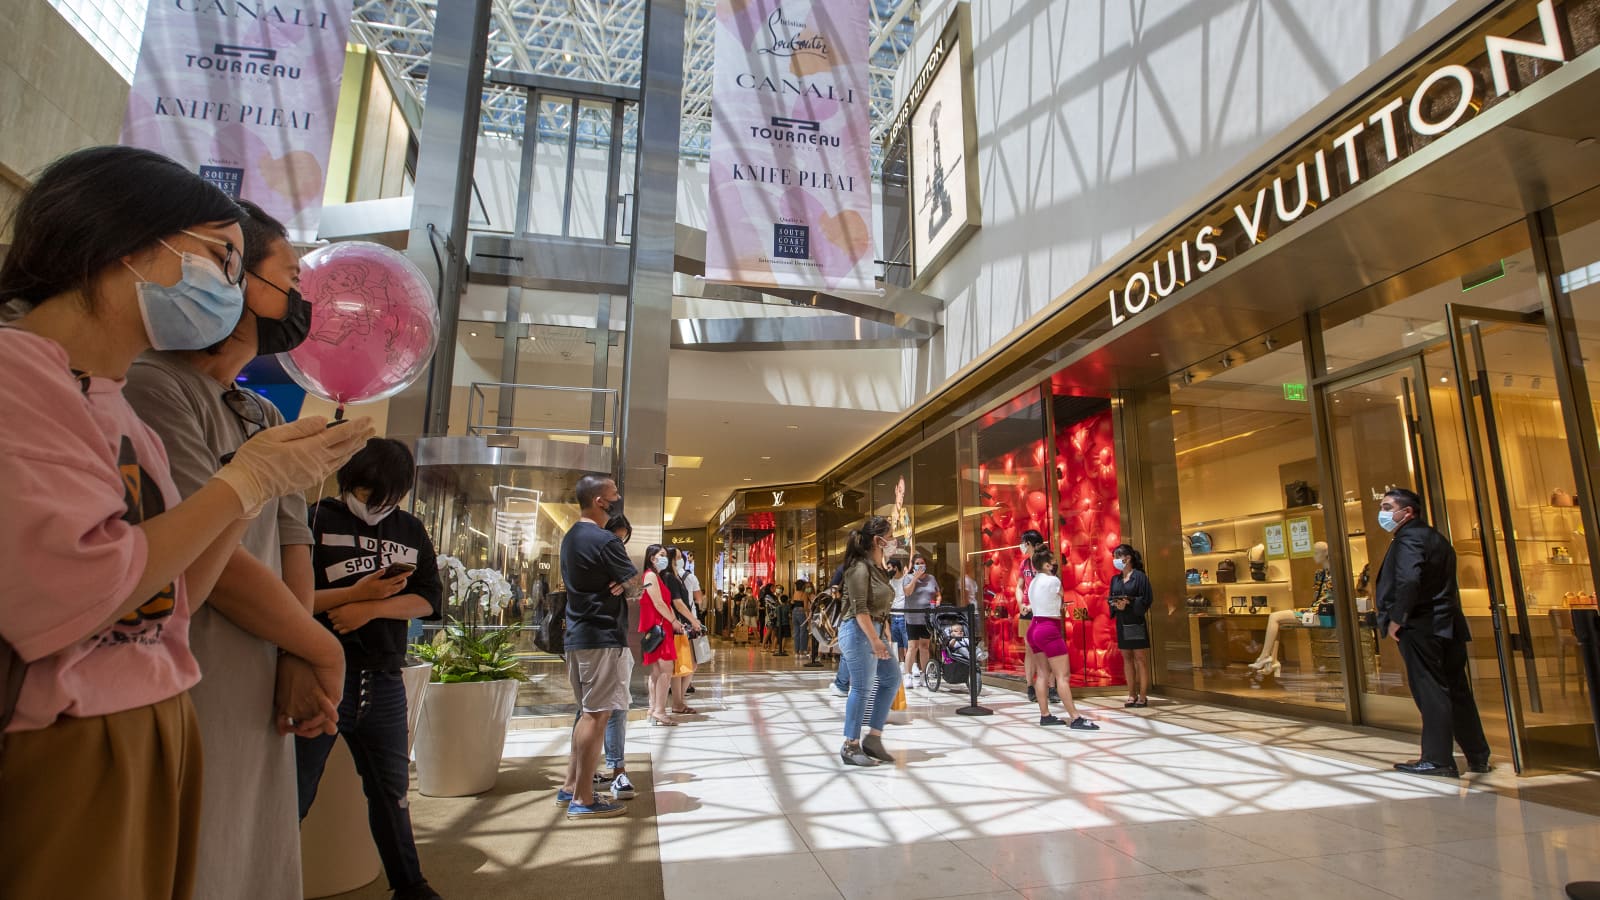 Louis Vuitton Chairman to meet retail owners during his visit to